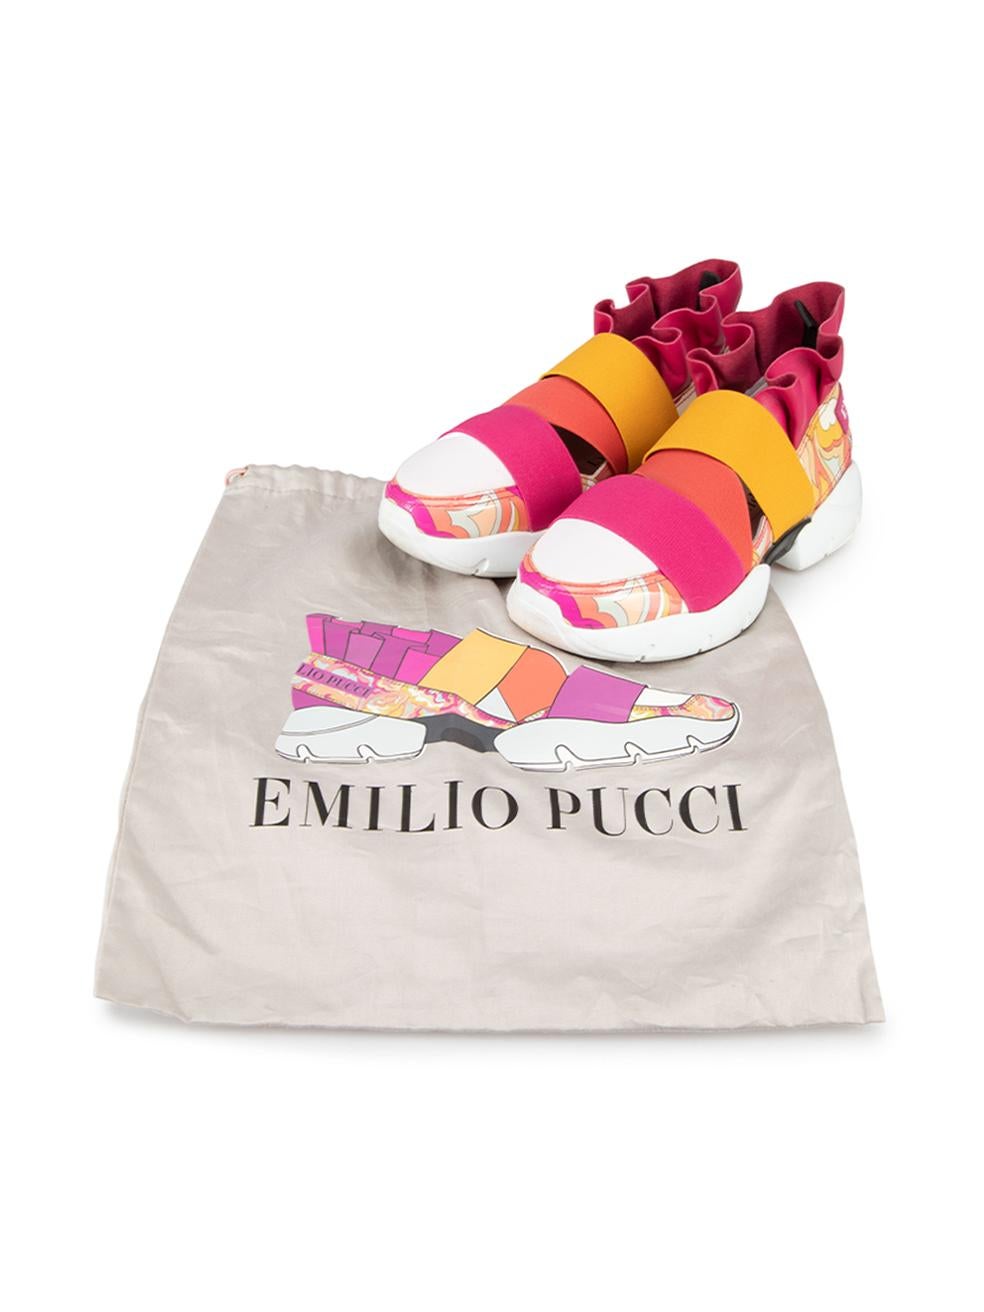 Emilio Pucci Pink & Yellow Leather Ruffle Trim Trainers Size IT 36 For Sale 2